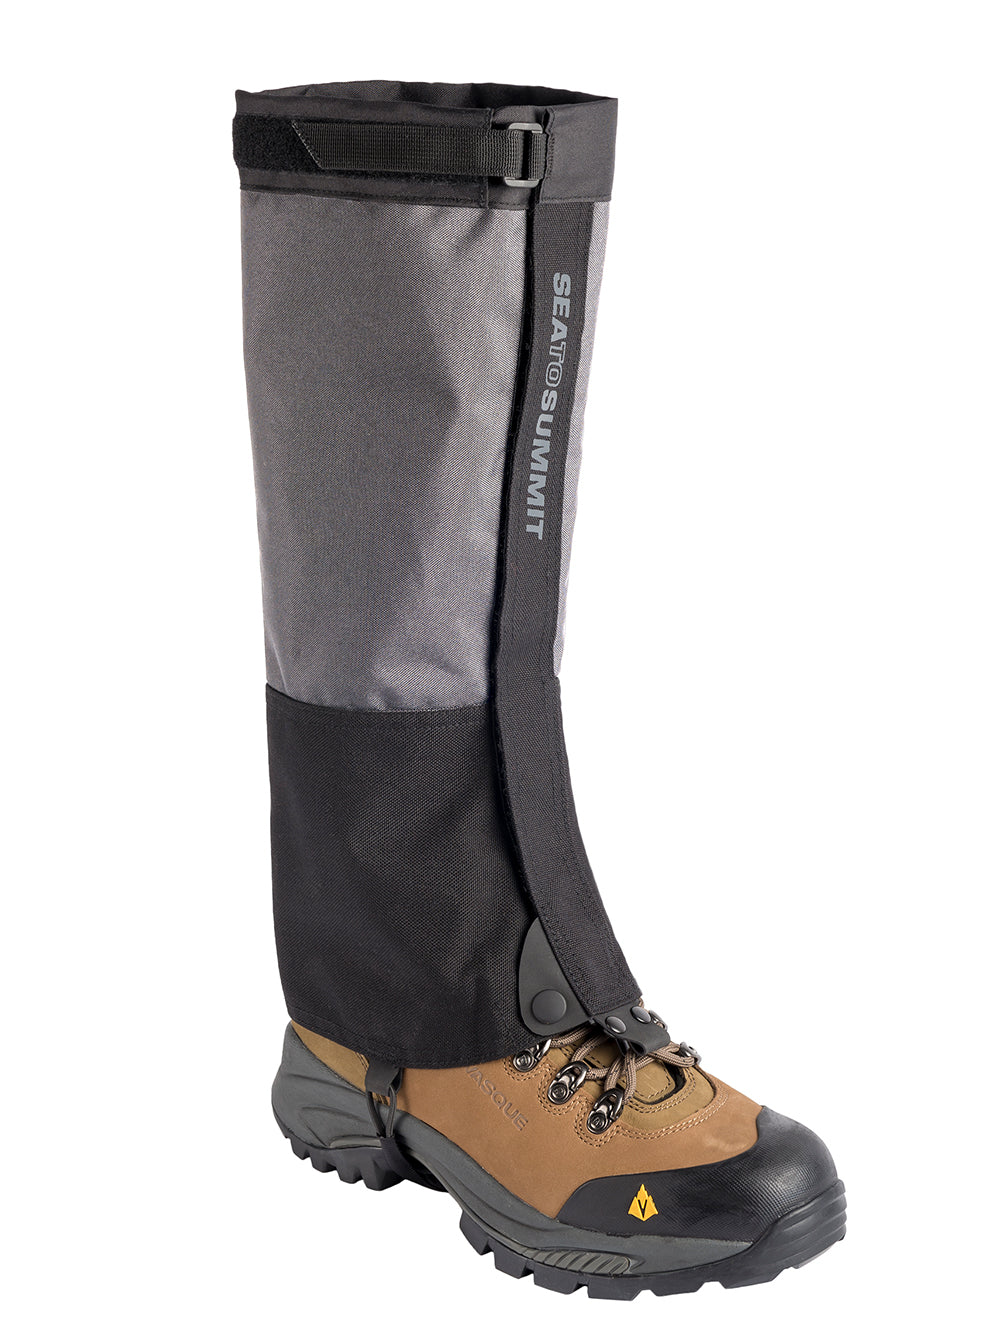 Canvas gaiters positioned correctly over shoe